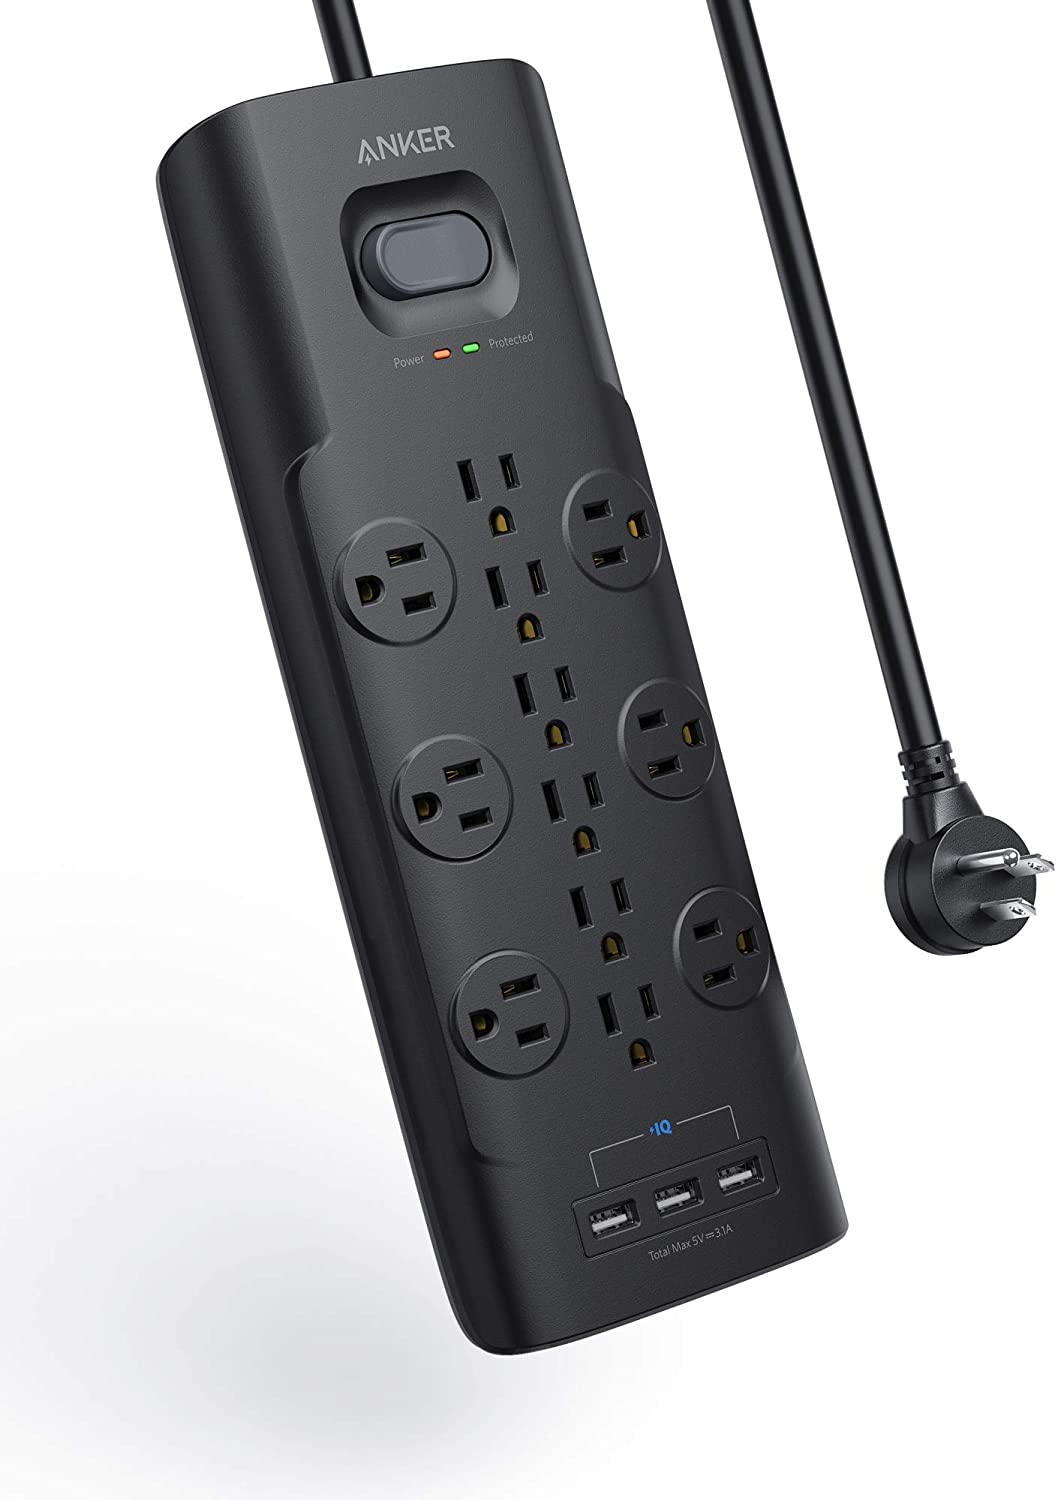 Anker 12 Outlets & 3 USB Ports Power Strip Surge Protector $20.99 +Free Prime Shipping